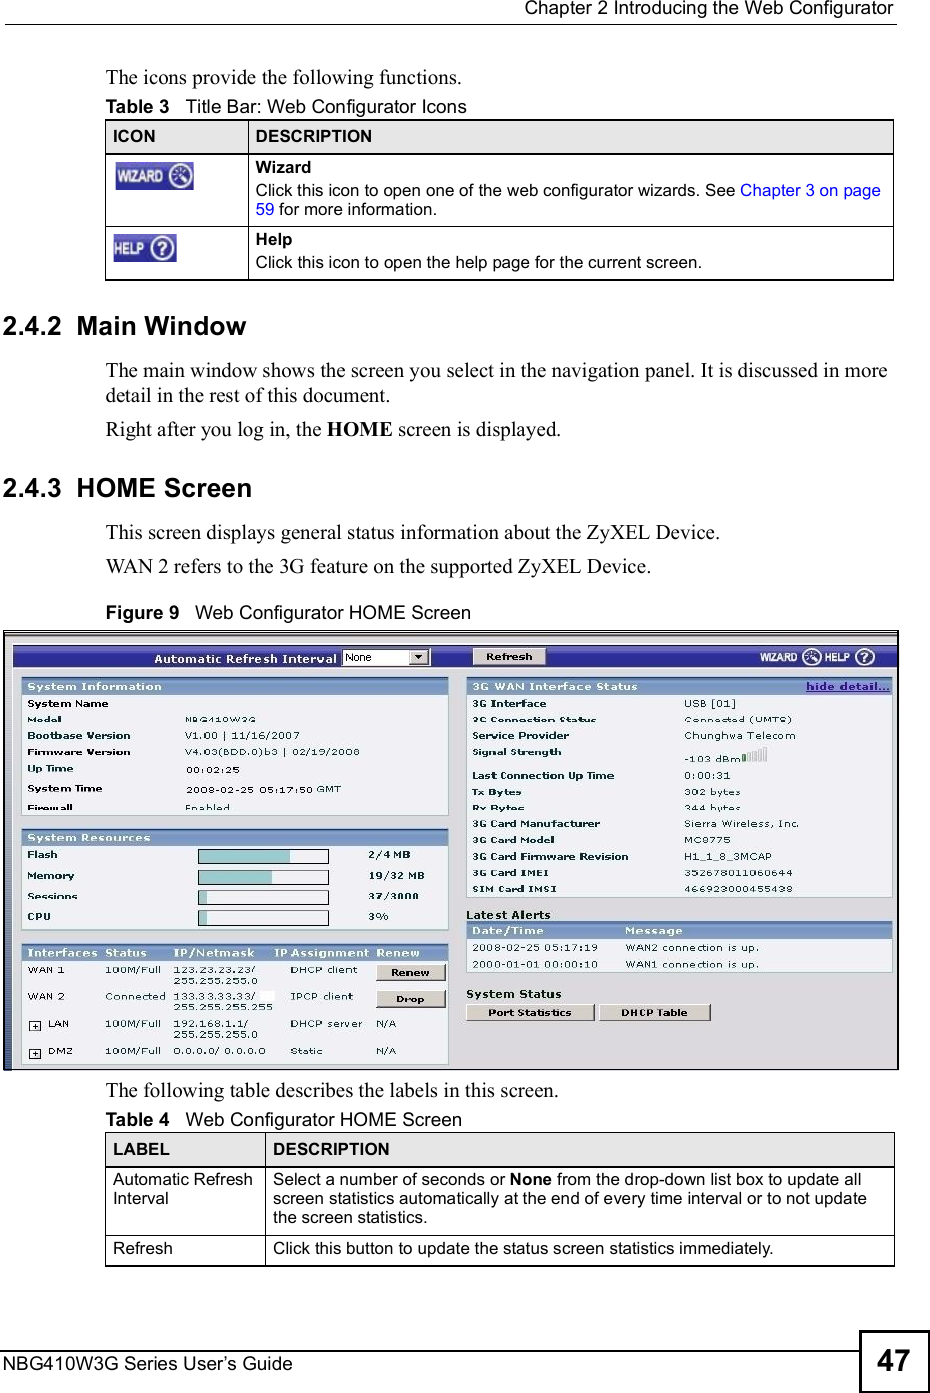  Chapter 2Introducing the Web ConfiguratorNBG410W3G Series User s Guide 47The icons provide the following functions.2.4.2  Main WindowThe main window shows the screen you select in the navigation panel. It is discussed in more detail in the rest of this document.Right after you log in, the HOME screen is displayed.2.4.3  HOME Screen This screen displays general status information about the ZyXEL Device.  WAN 2 refers to the 3G feature on the supported ZyXEL Device.Figure 9   Web Configurator HOME Screen The following table describes the labels in this screen. Table 3   Title Bar: Web Configurator IconsICON  DESCRIPTIONWizardClick this icon to open one of the web configurator wizards. See Chapter 3 on page 59 for more information.HelpClick this icon to open the help page for the current screen.Table 4   Web Configurator HOME ScreenLABEL DESCRIPTIONAutomatic Refresh Interval Select a number of seconds or None from the drop-down list box to update all screen statistics automatically at the end of every time interval or to not update the screen statistics.RefreshClick this button to update the status screen statistics immediately.